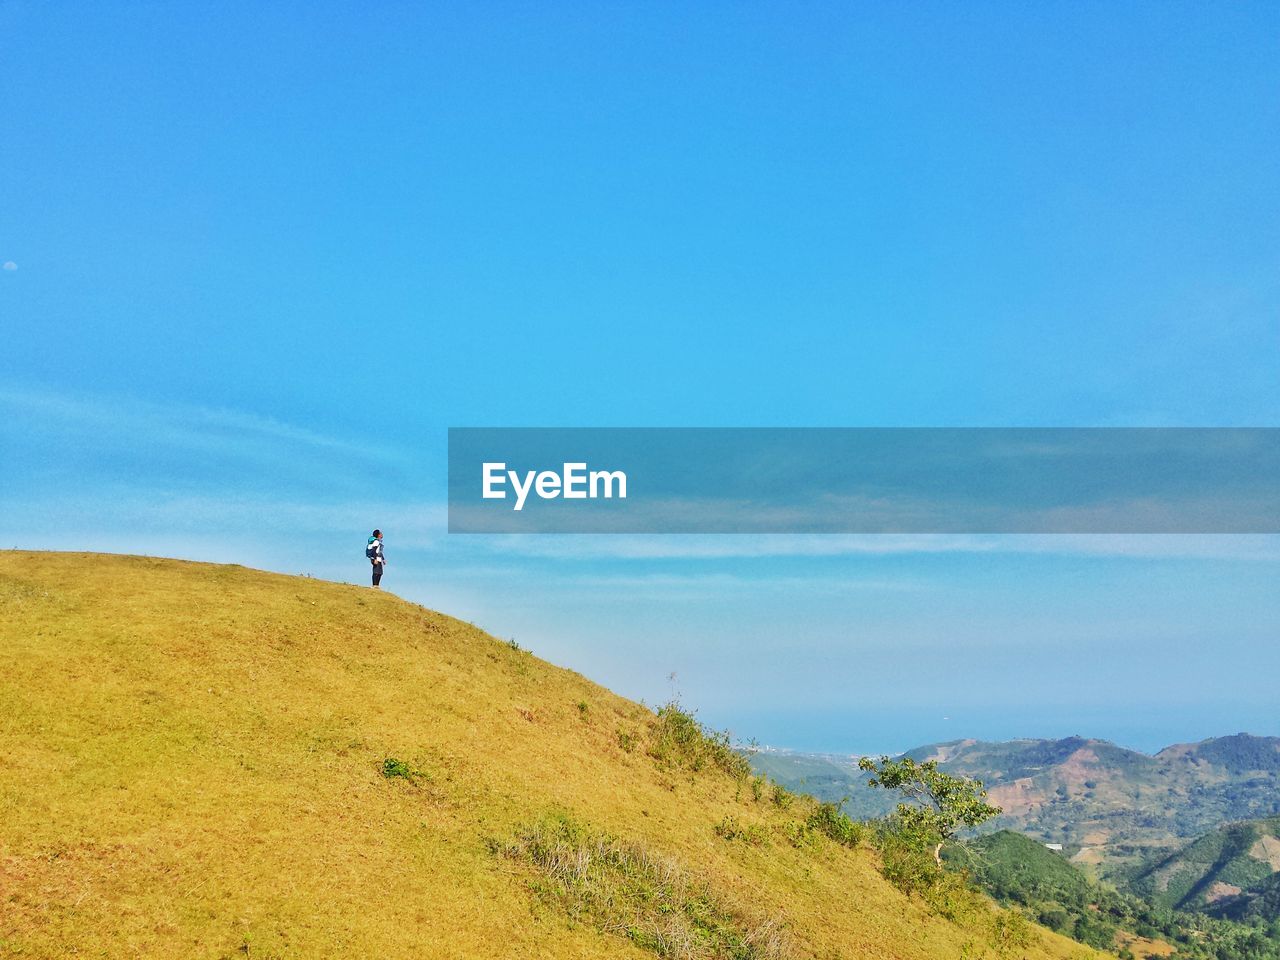 Mid distance view of man standing on mountain against blue sky